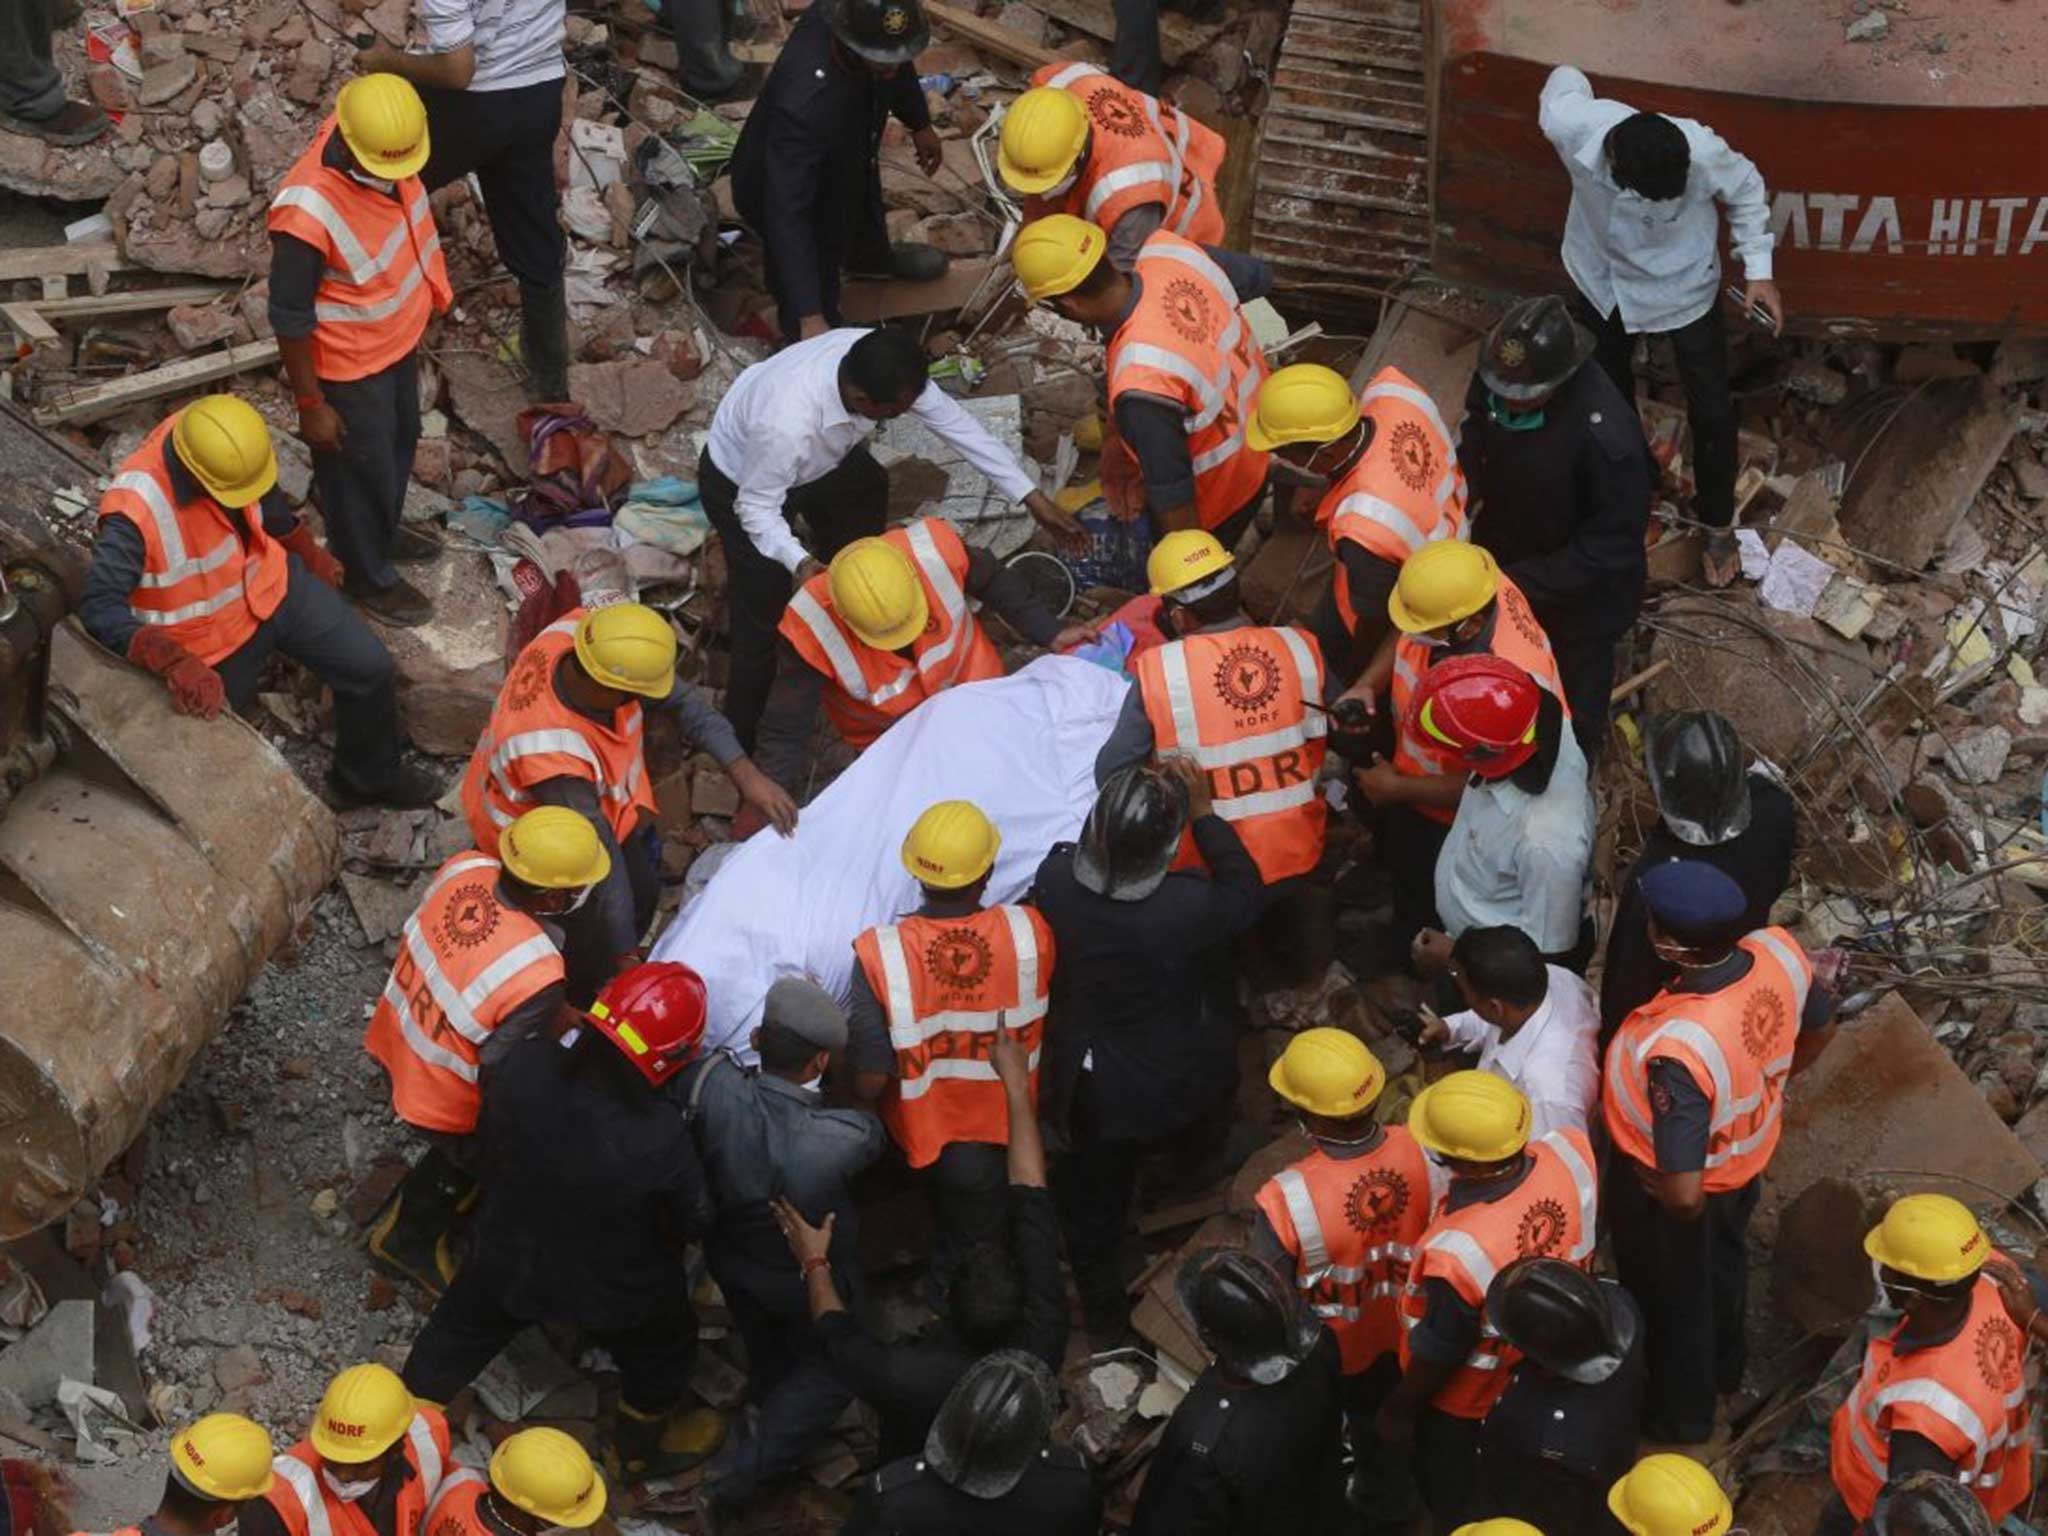 Rescue workers carry the body of a victim at the site of building collapse in Thane